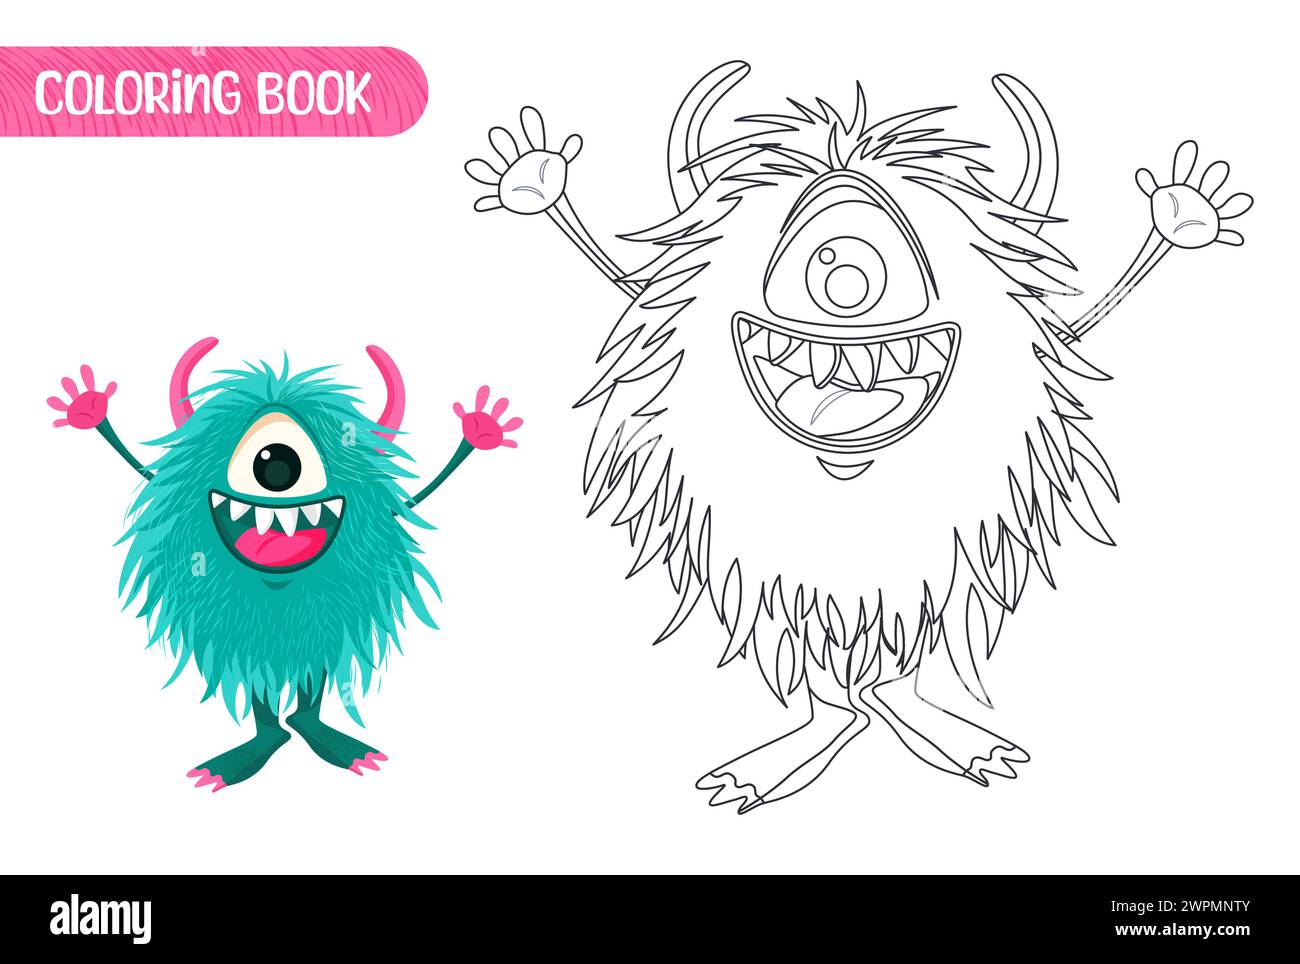 Coloring book for kids. Cute funny monster. Stock Vector